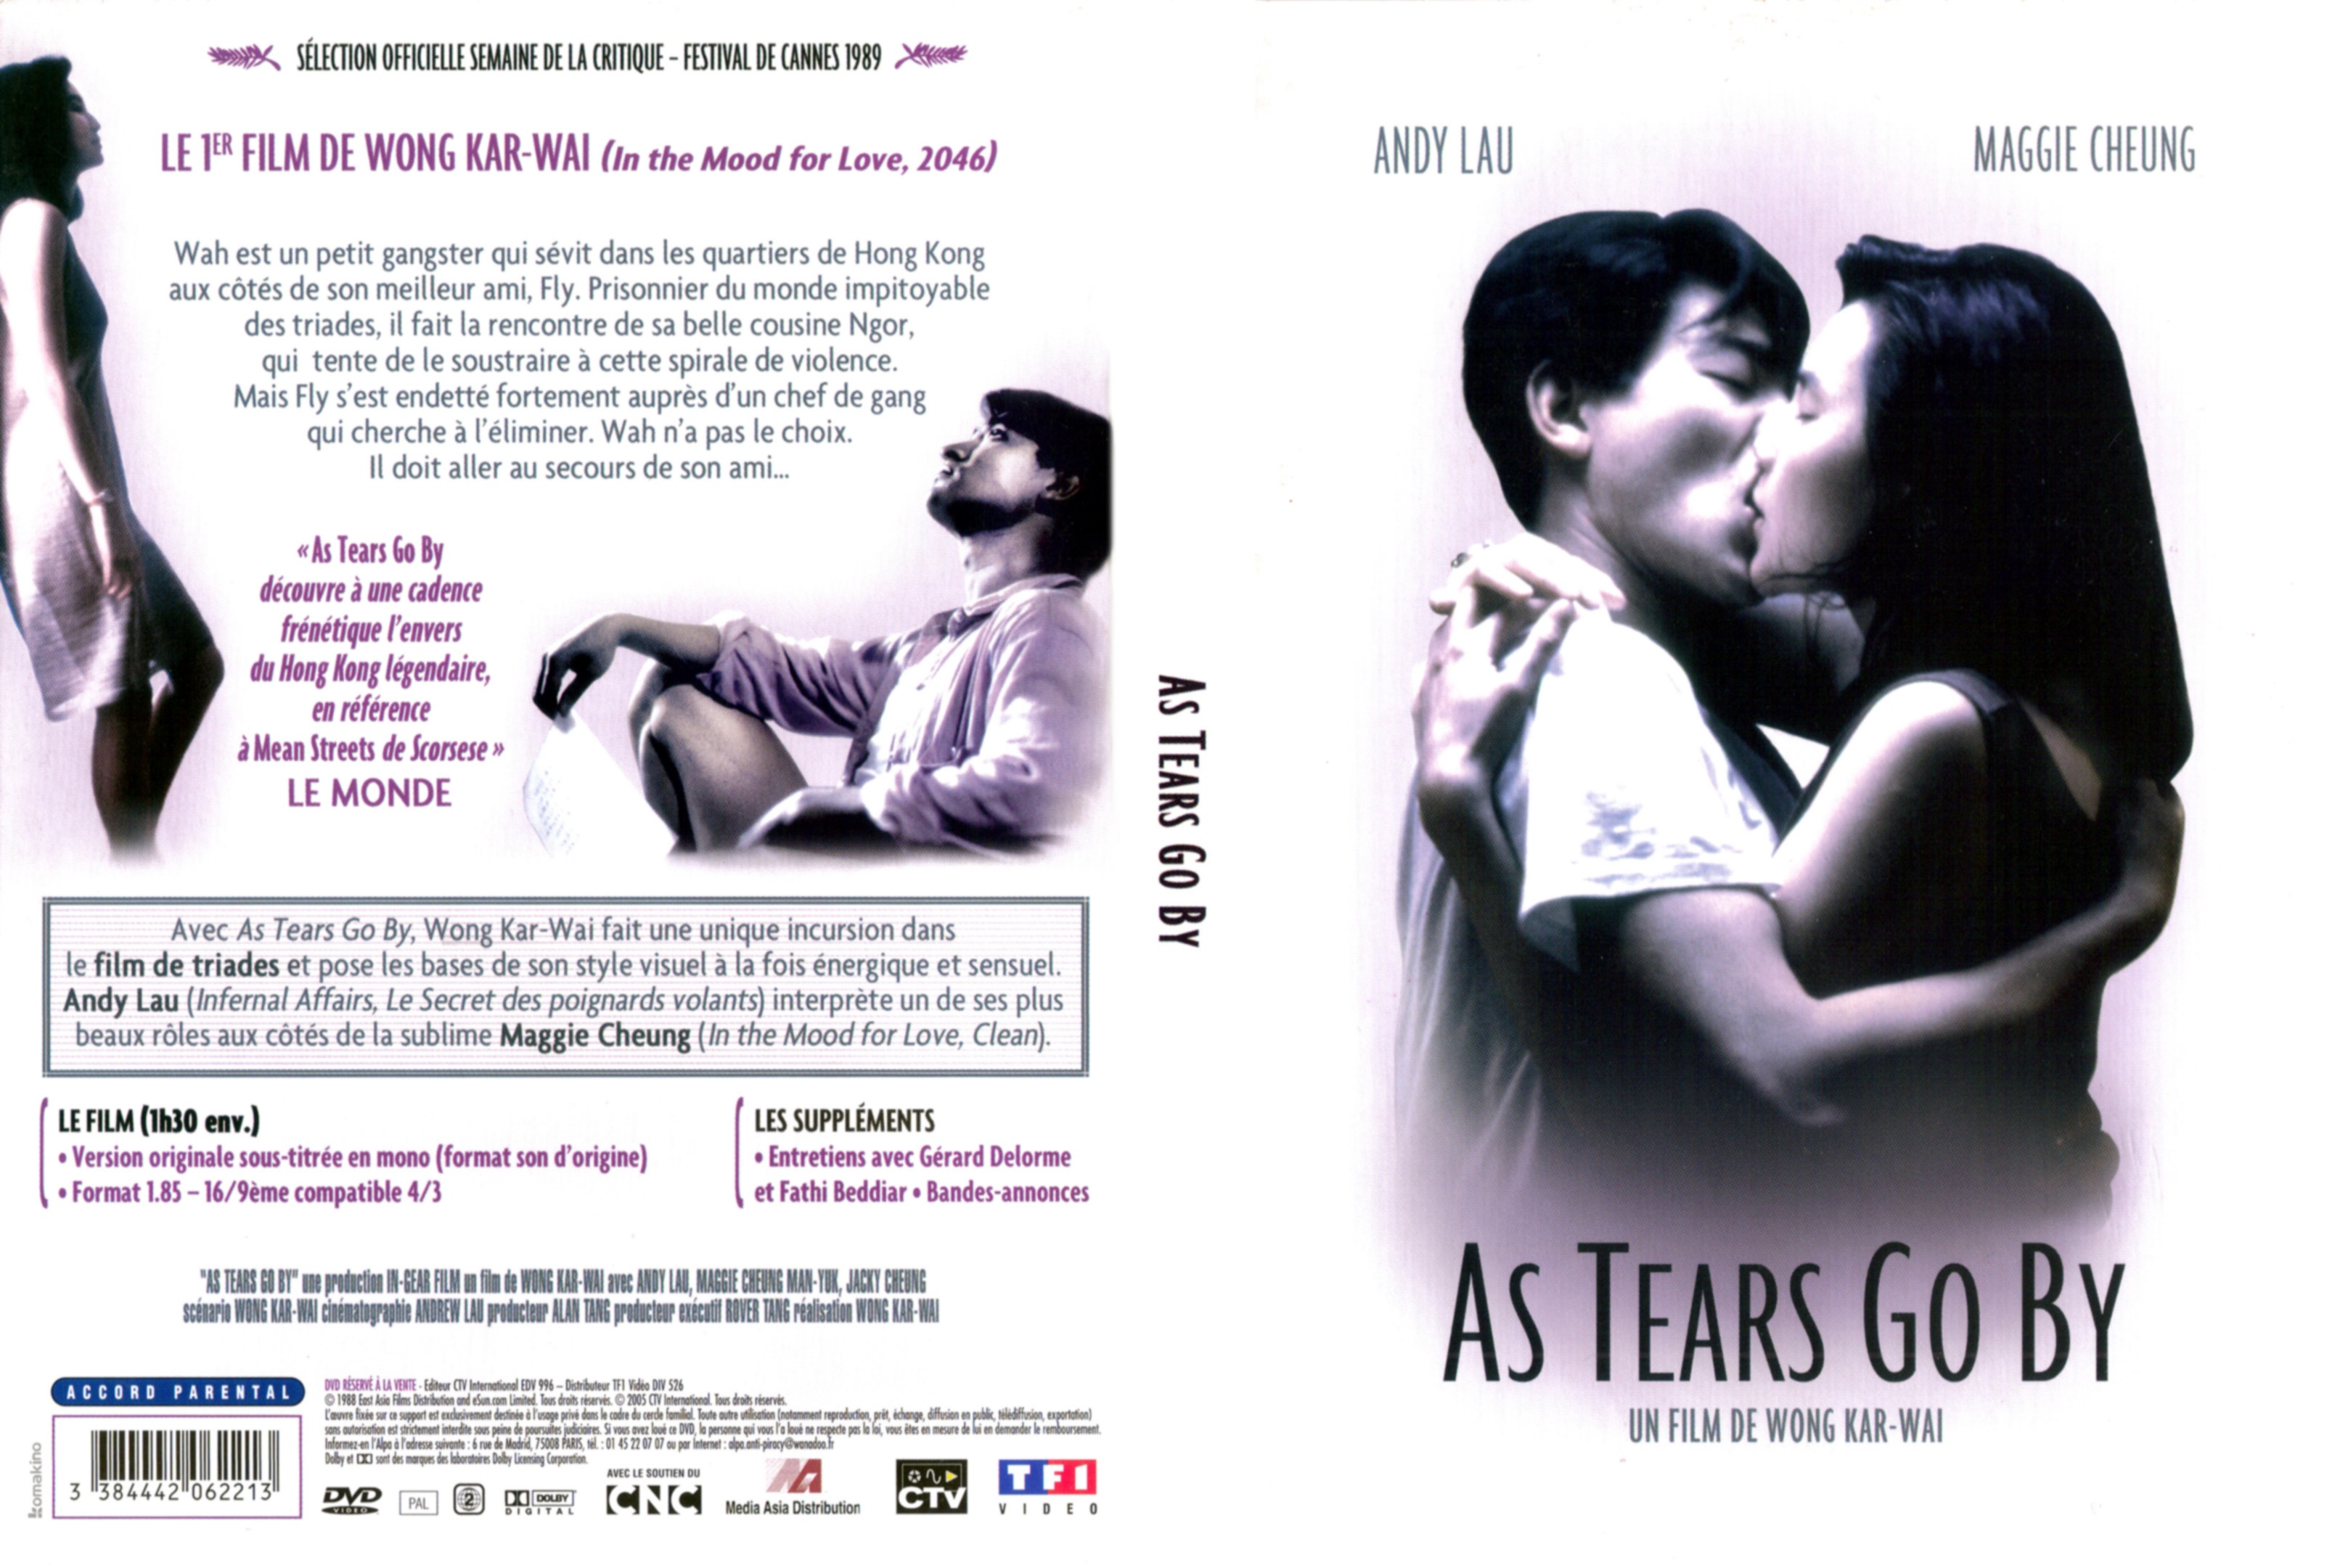 Jaquette DVD As tears go by